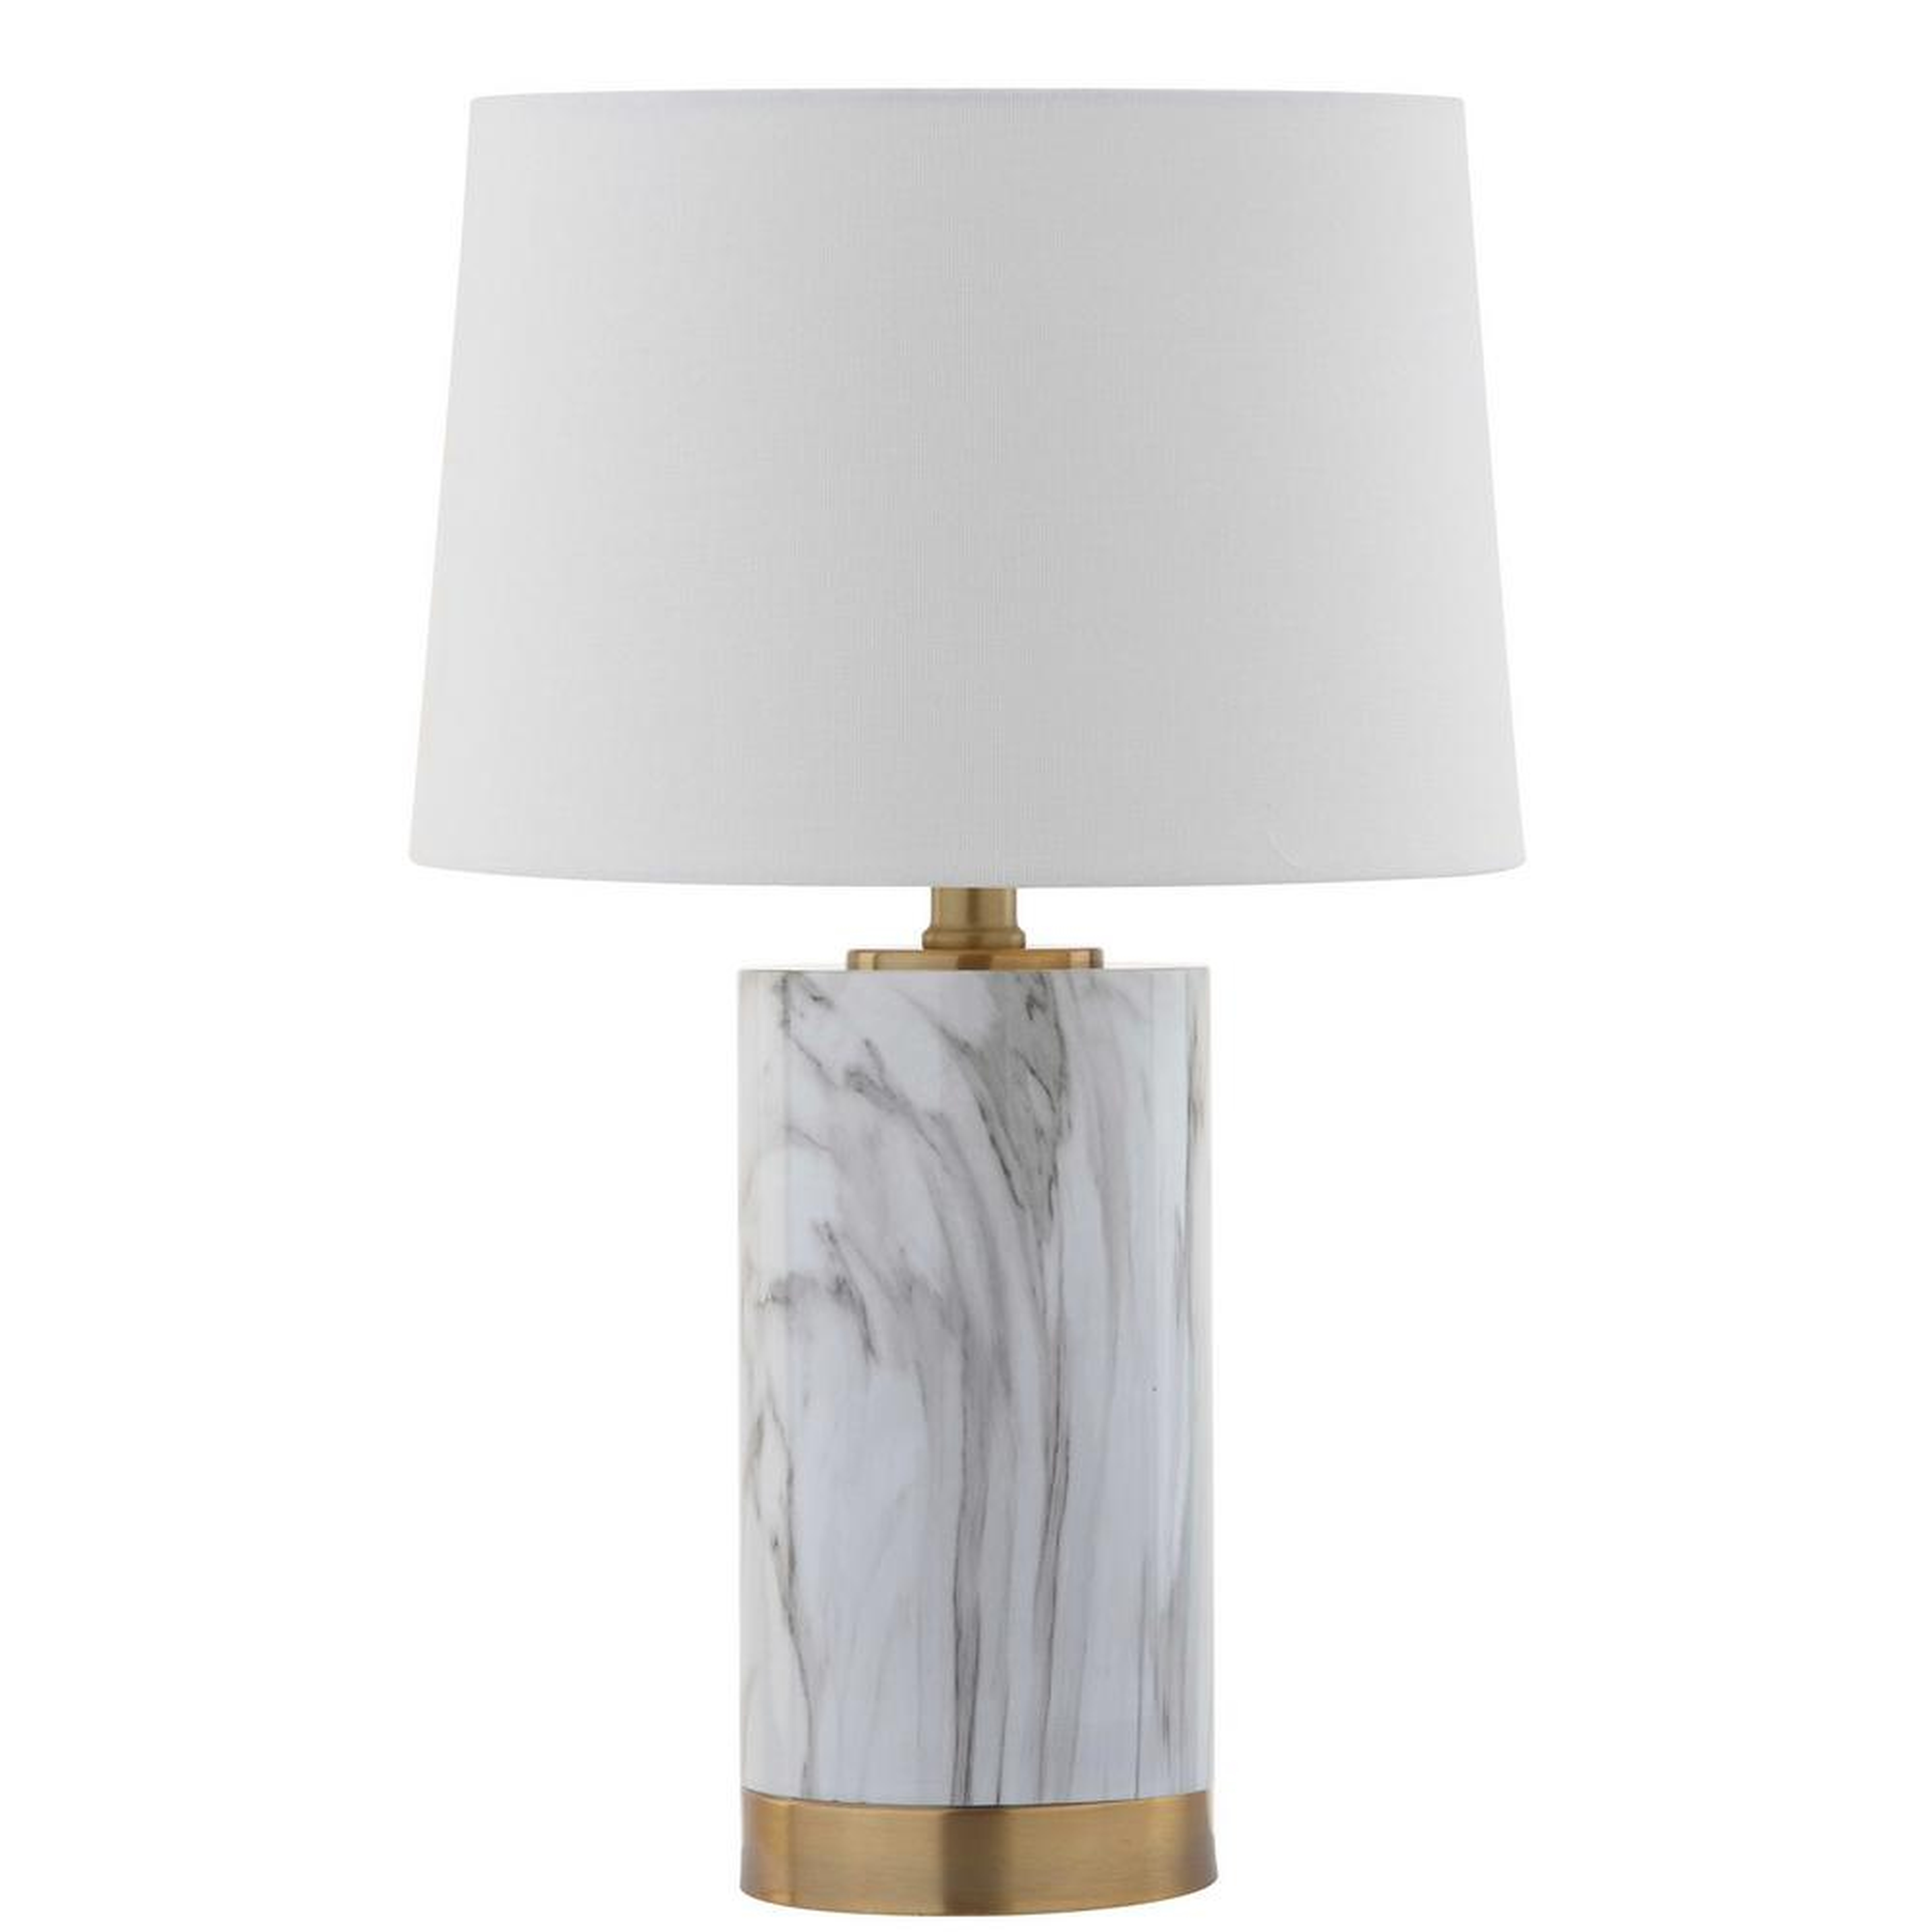 Clarabel Marble 18.25-Inch H Table Lamp - White/Black Marble - Arlo Home - Arlo Home